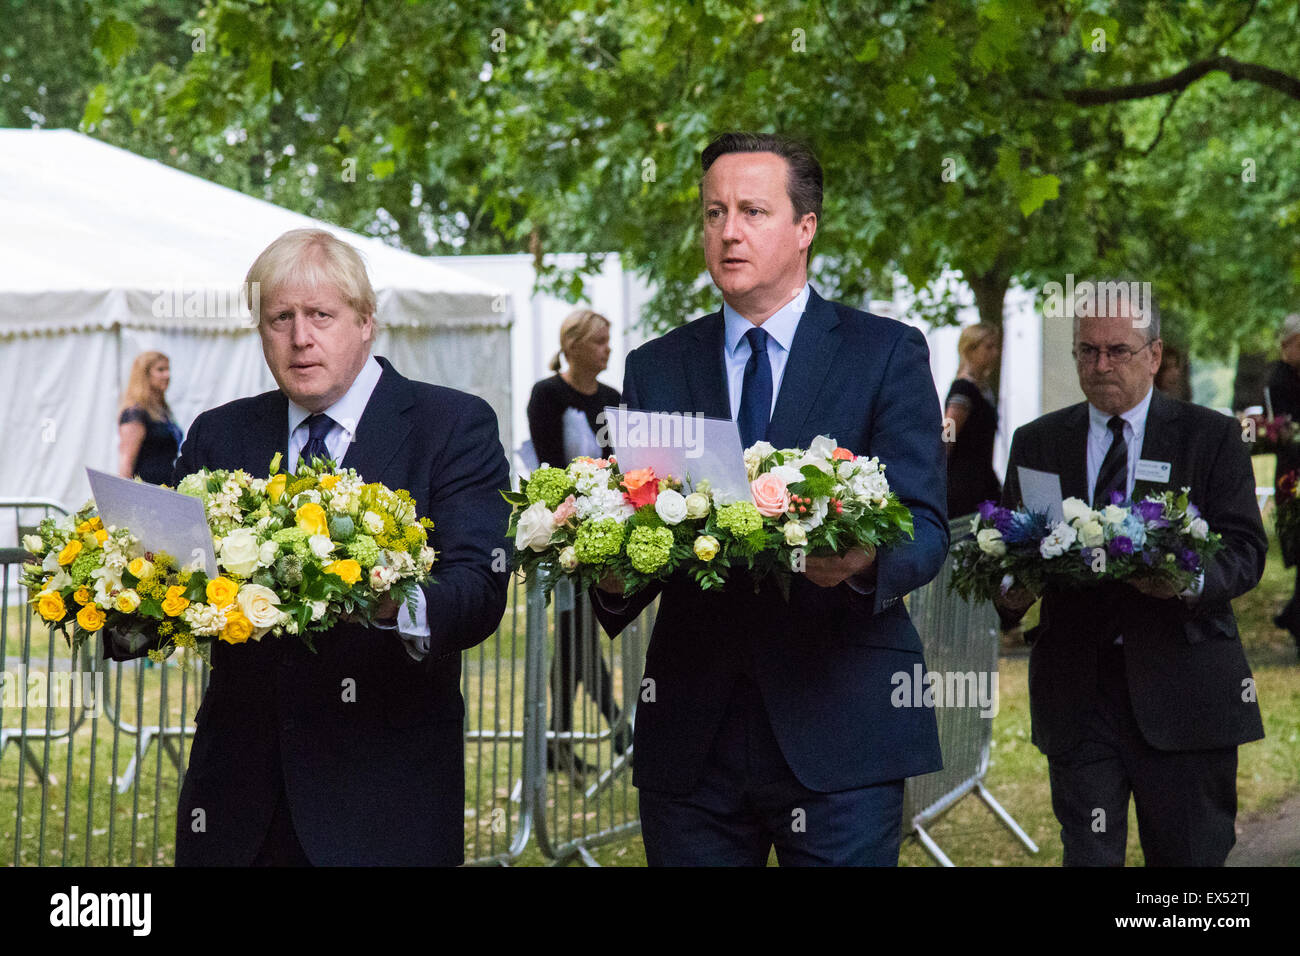 Hyde Park, London, July7th 2015. The Mayor of London Boris Johnson and other senior political figures, the Commissioners for transport and policing in the capital, as well as senior representatives of the emergency services lay wreaths at the 7/7 memorial in Hyde Park. PICTURED: Mayor of London Boris Johnson and Prime Minister David Cameron lead the sombre procession of senior politicians and representatives of the emergency services towards the 7/7 Memorial monument. Credit:  Paul Davey/Alamy Live News Stock Photo